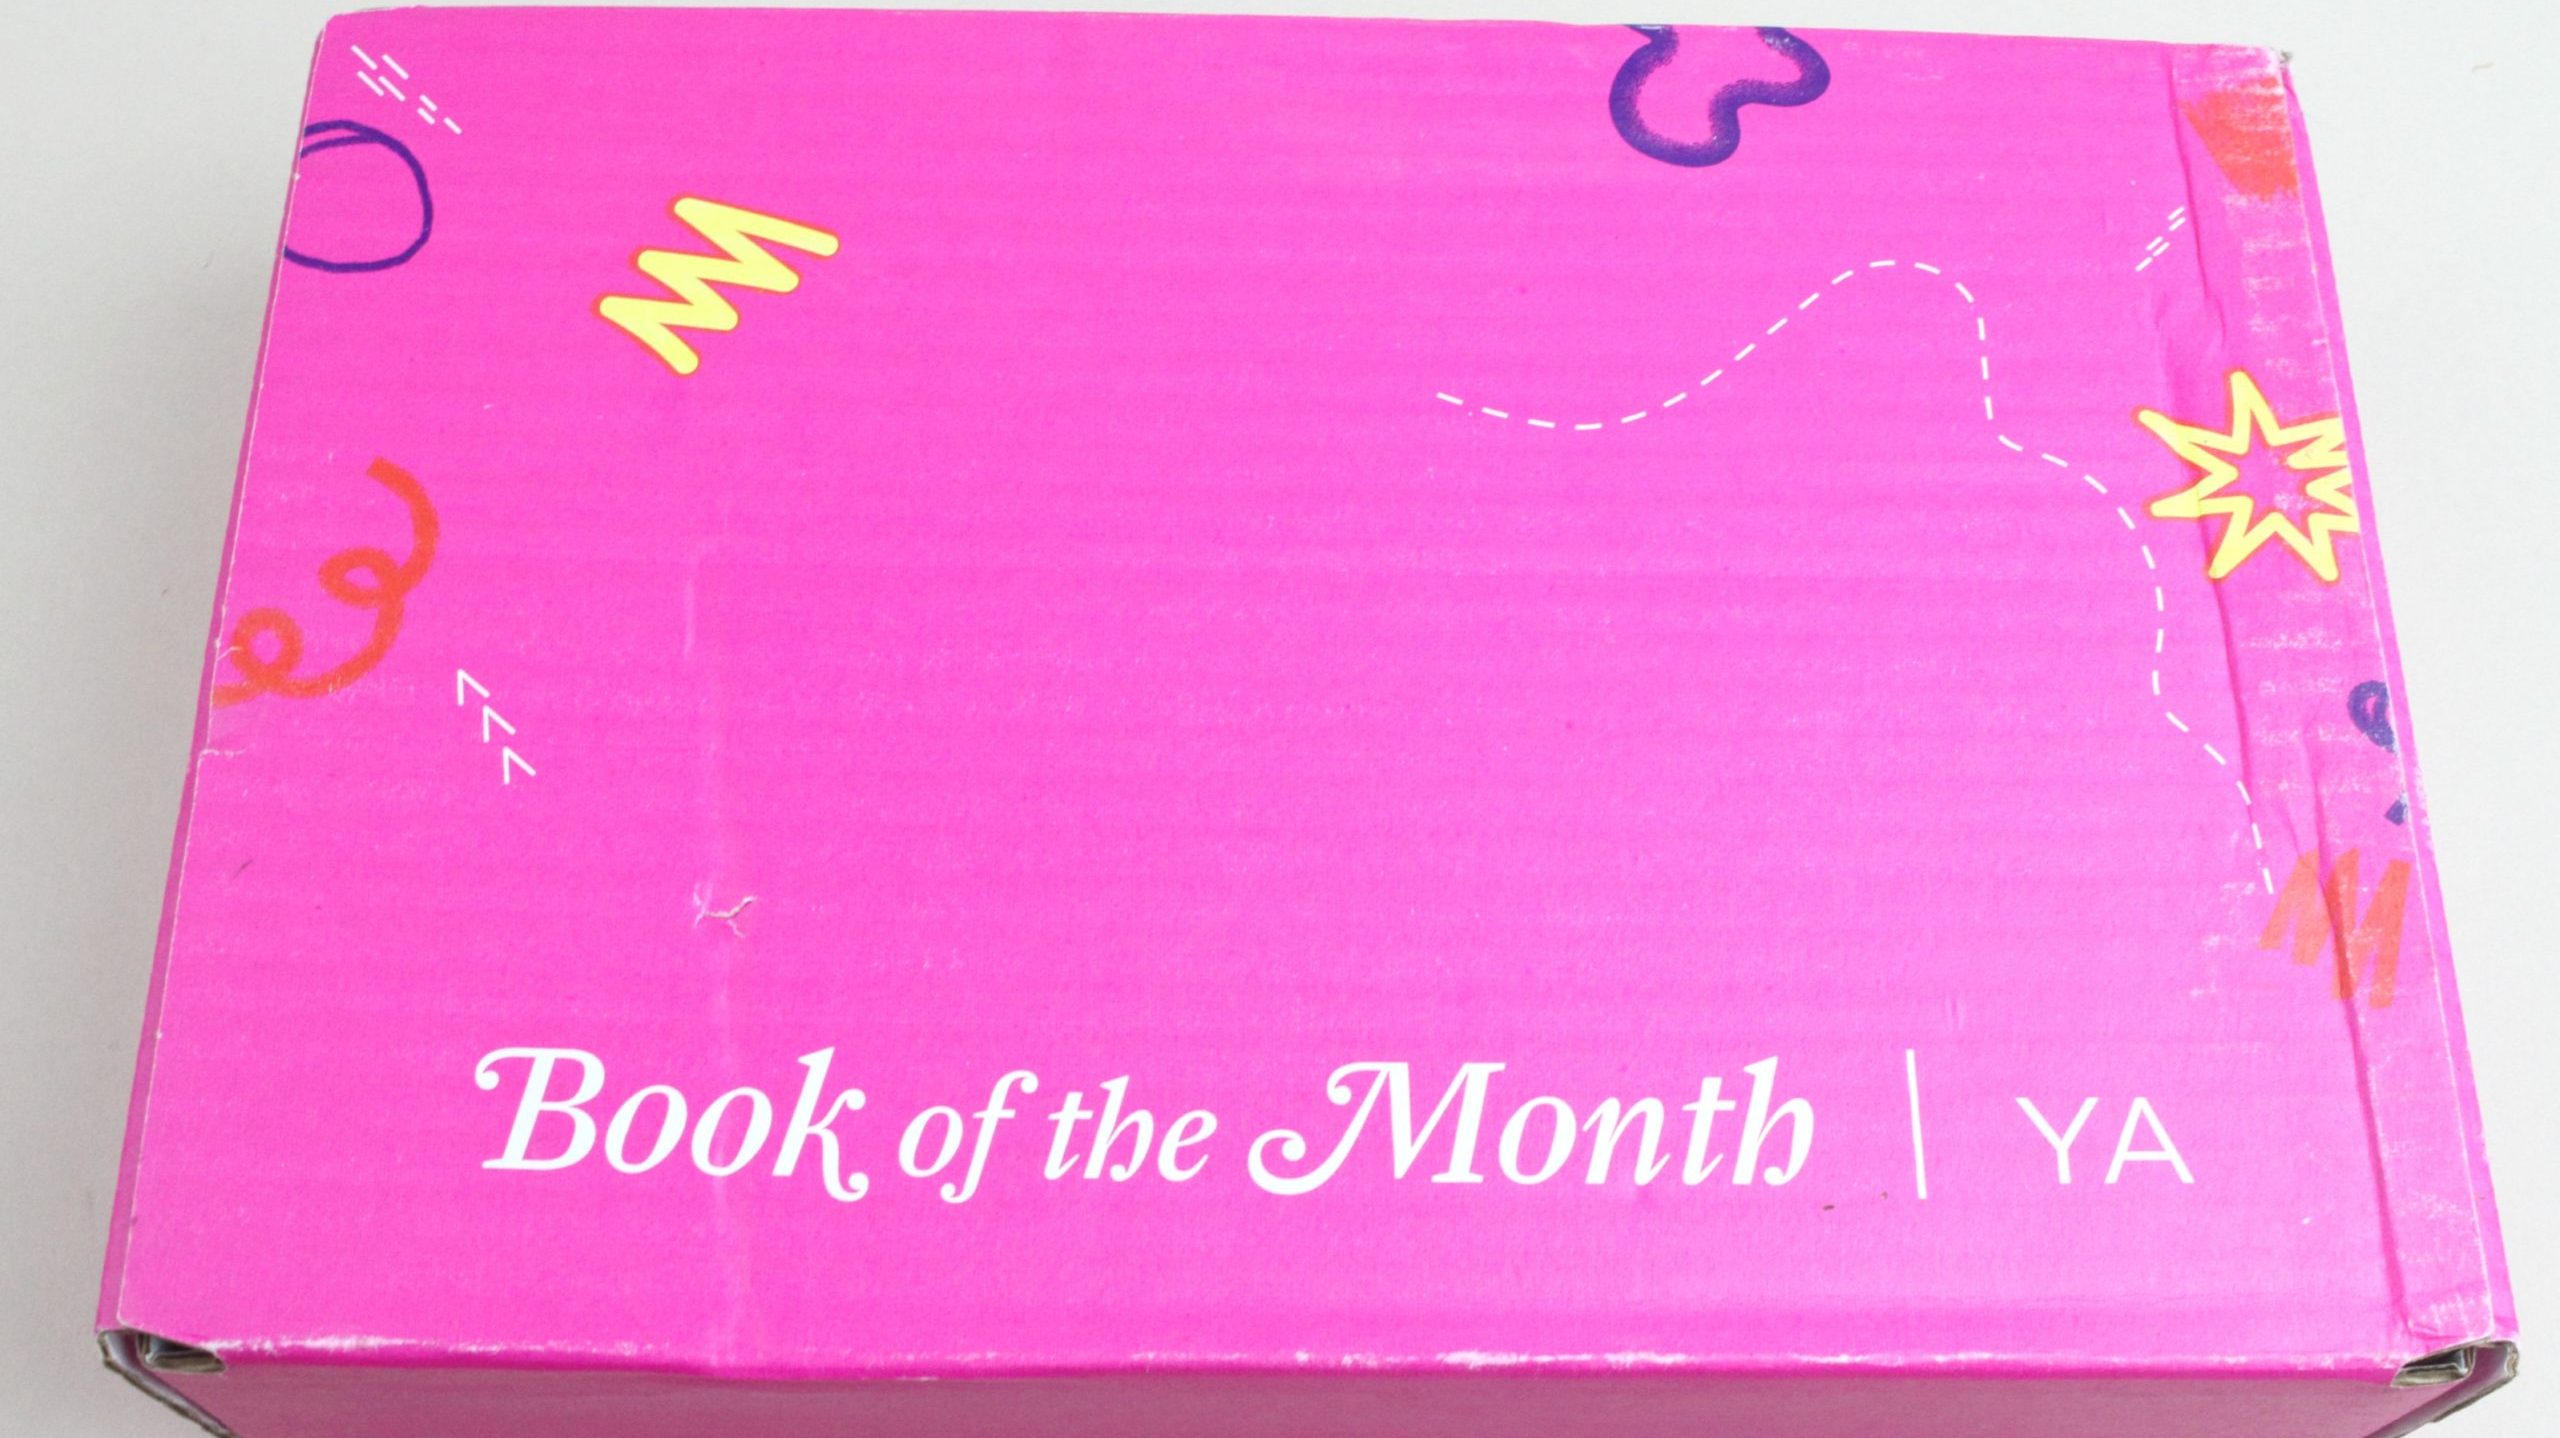 O my book. Book of the month.